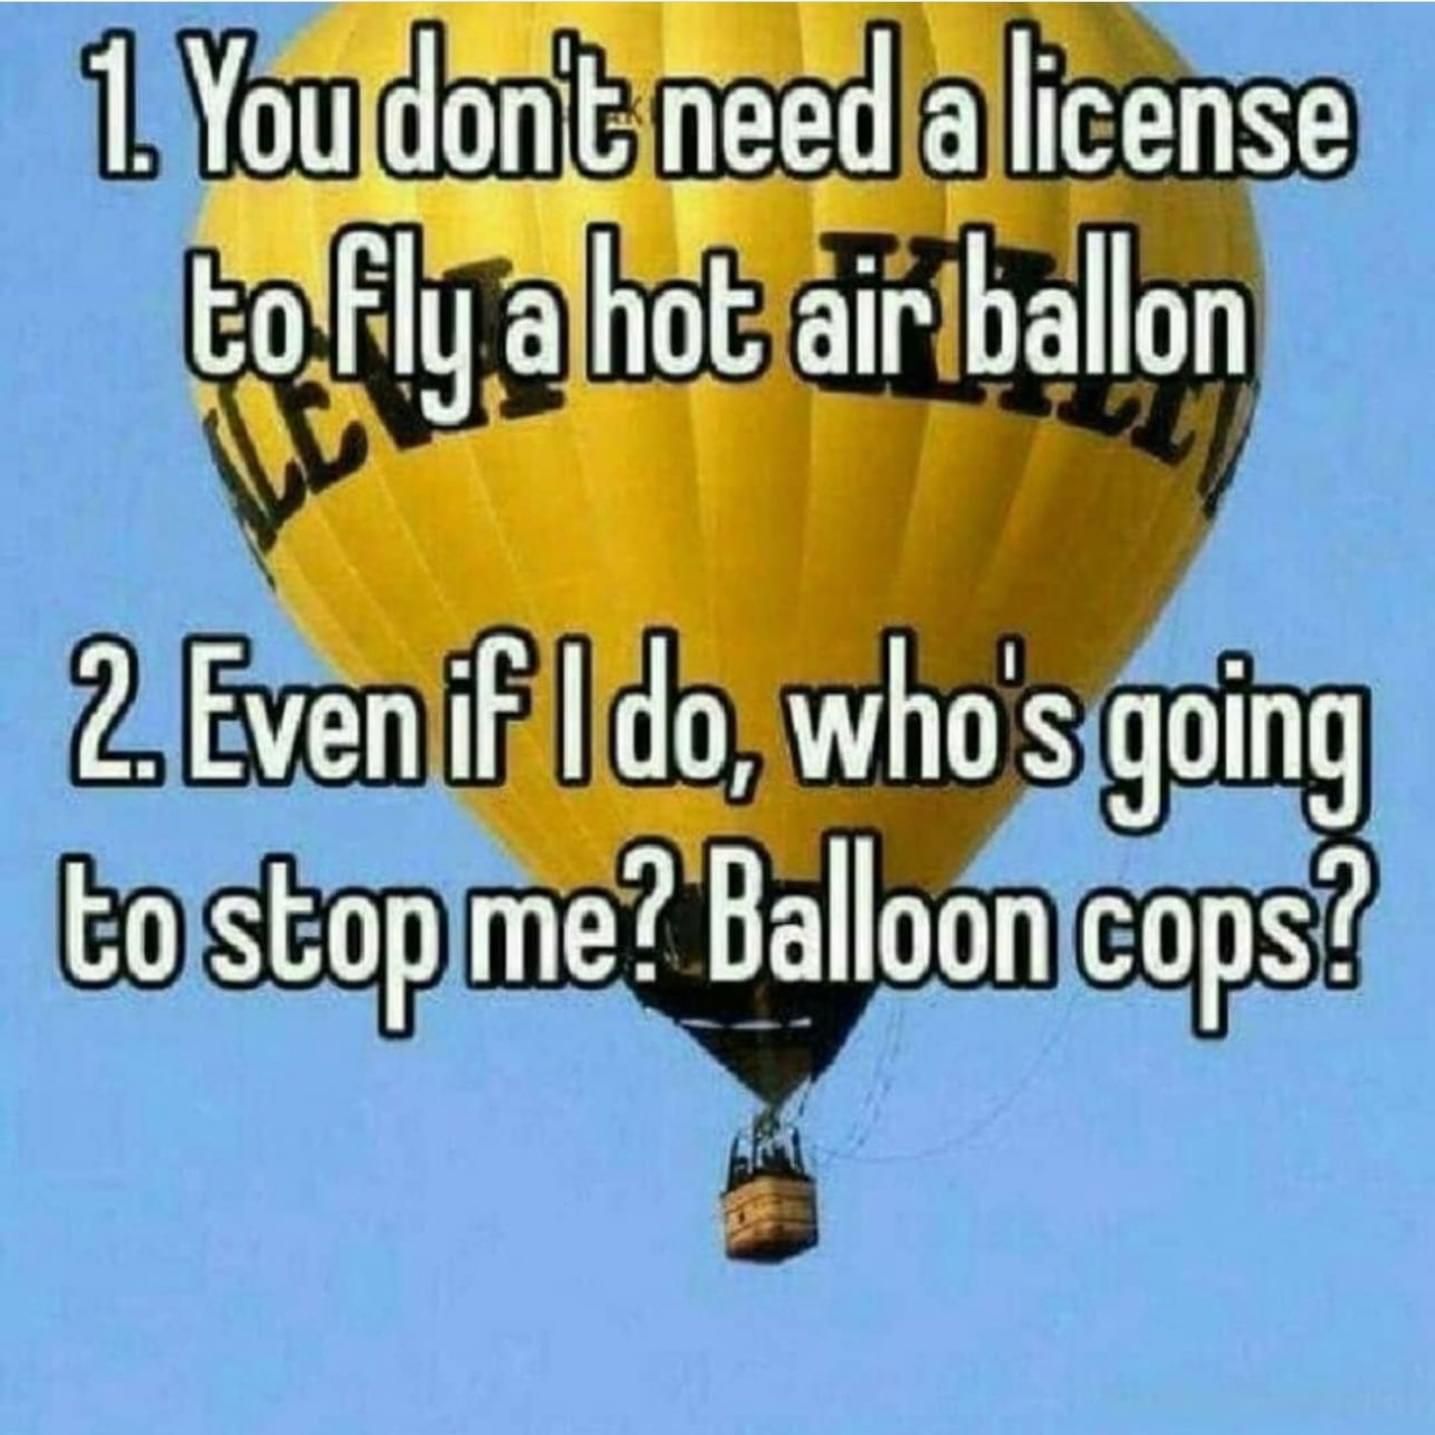 Everyone gangsta until the balloon cops come floating around